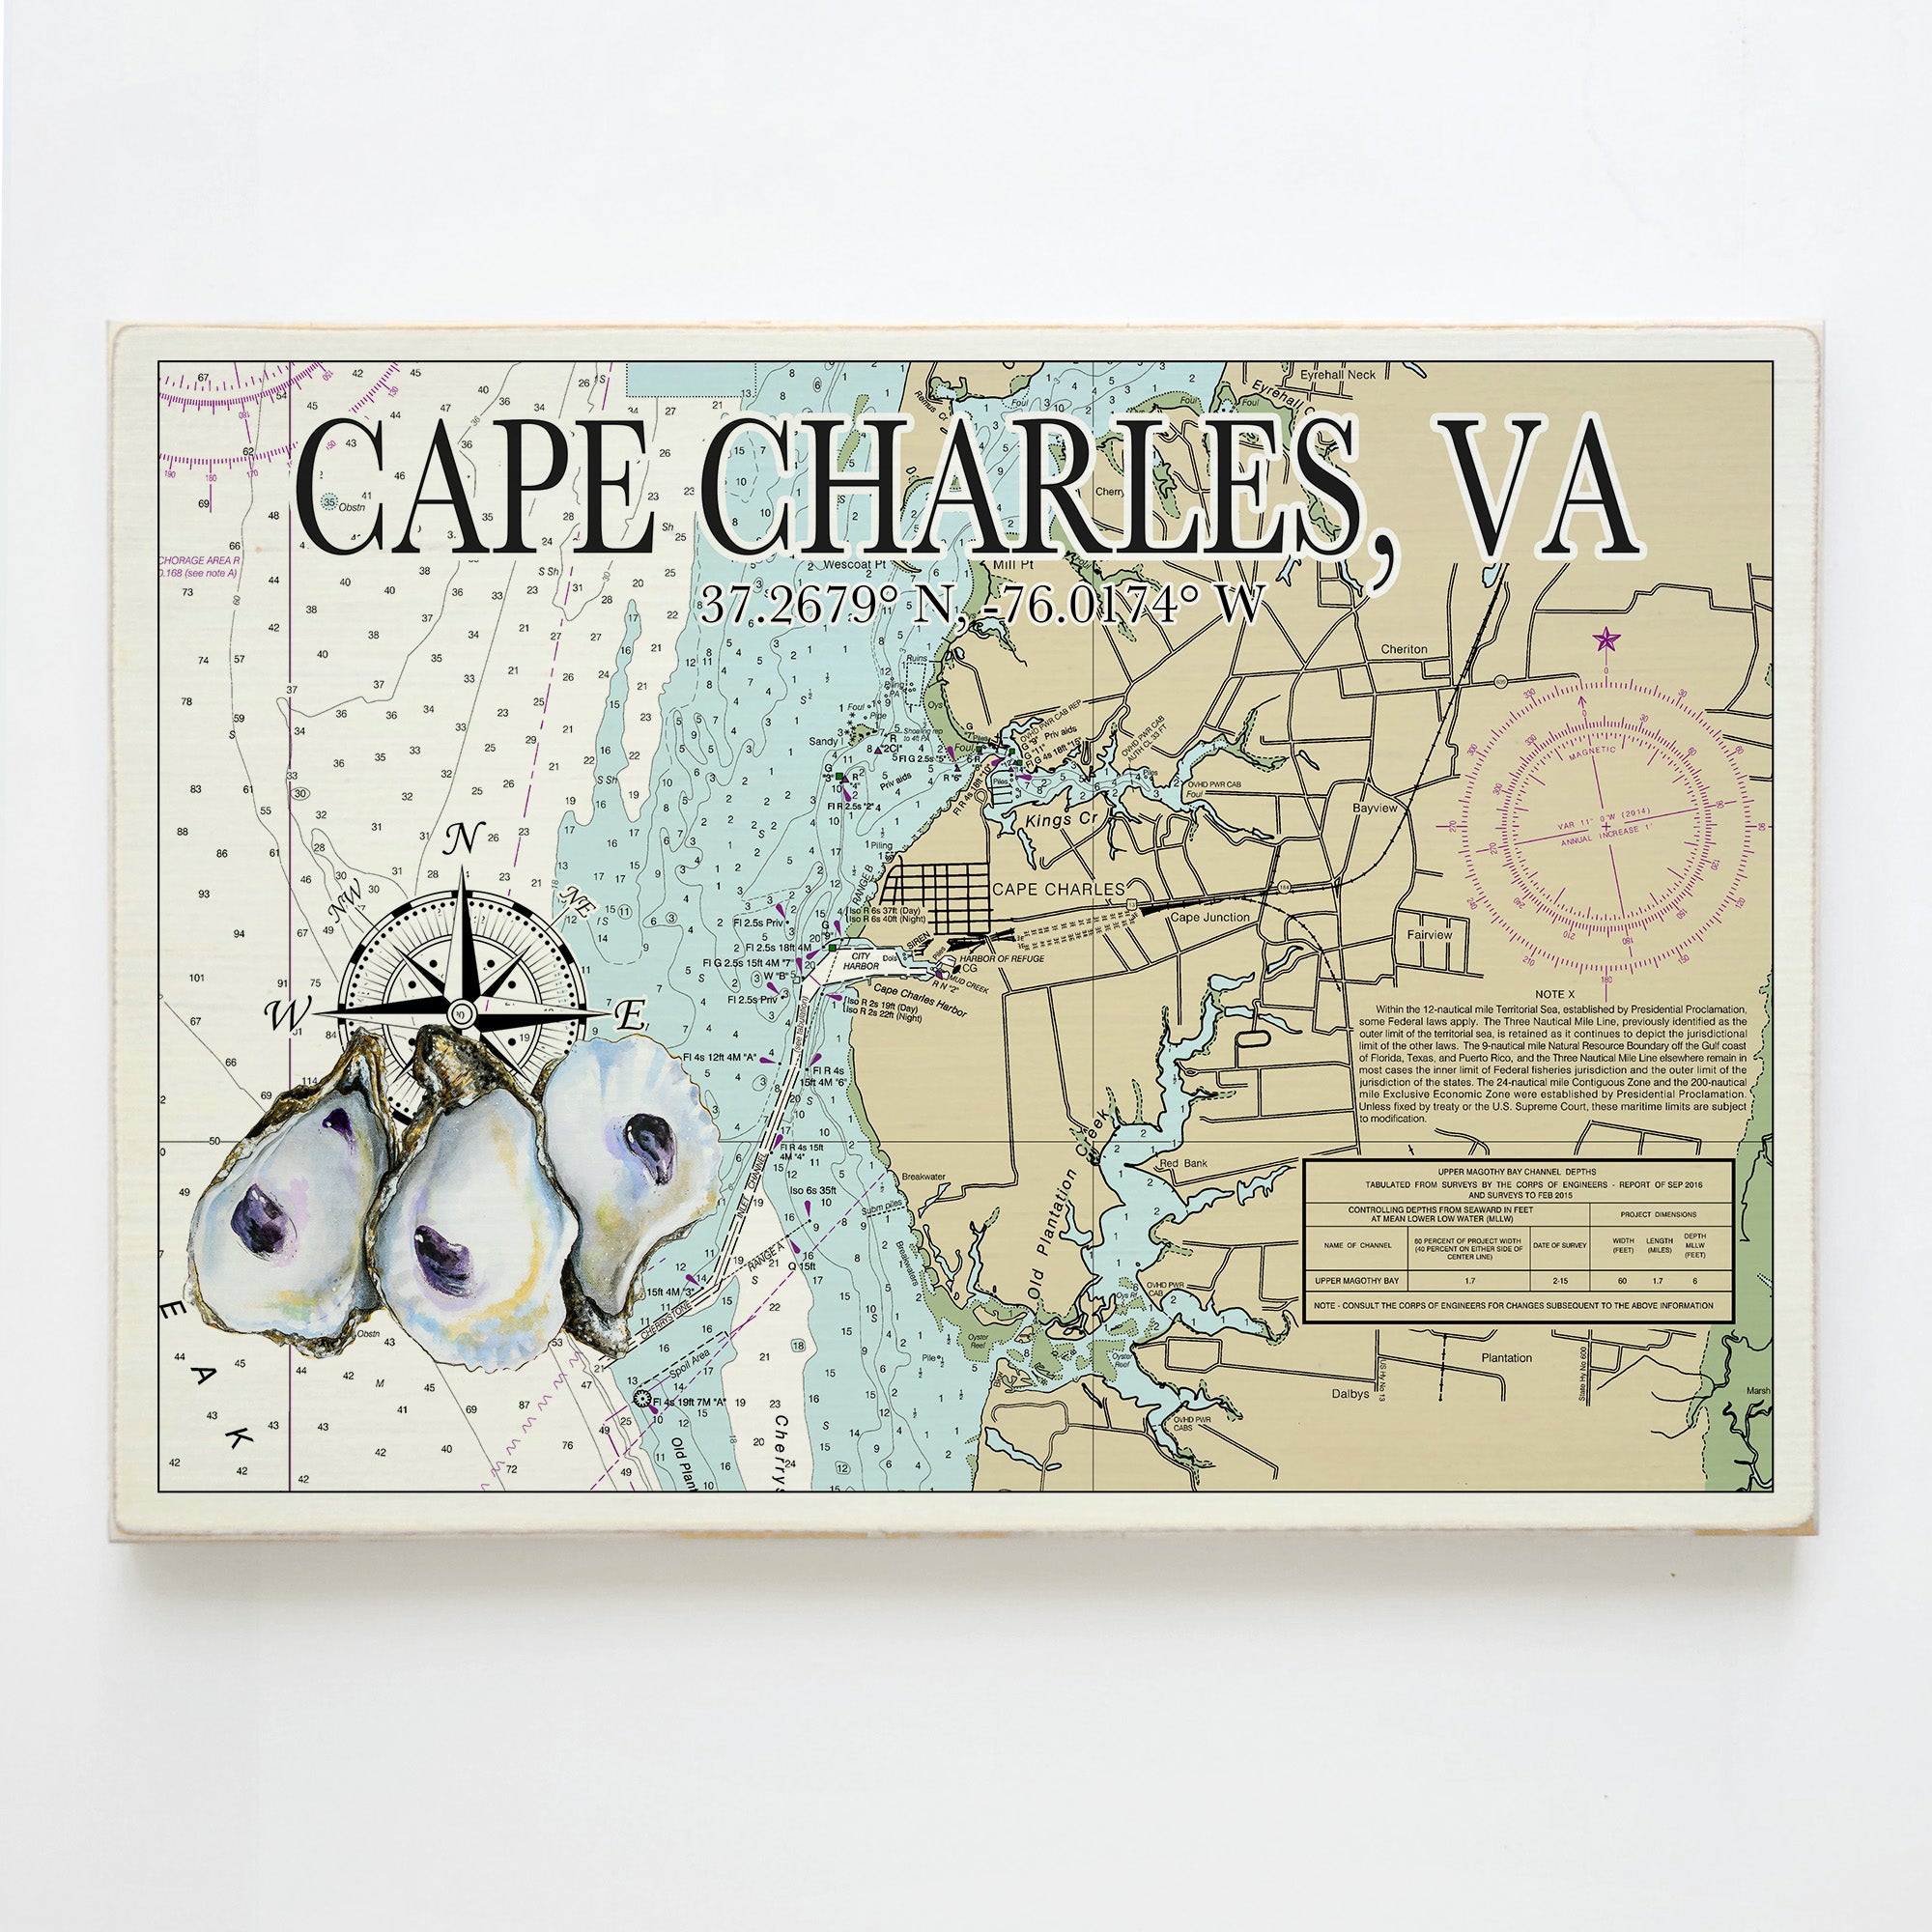 Cape Charles, VA  Oyster Plank Map